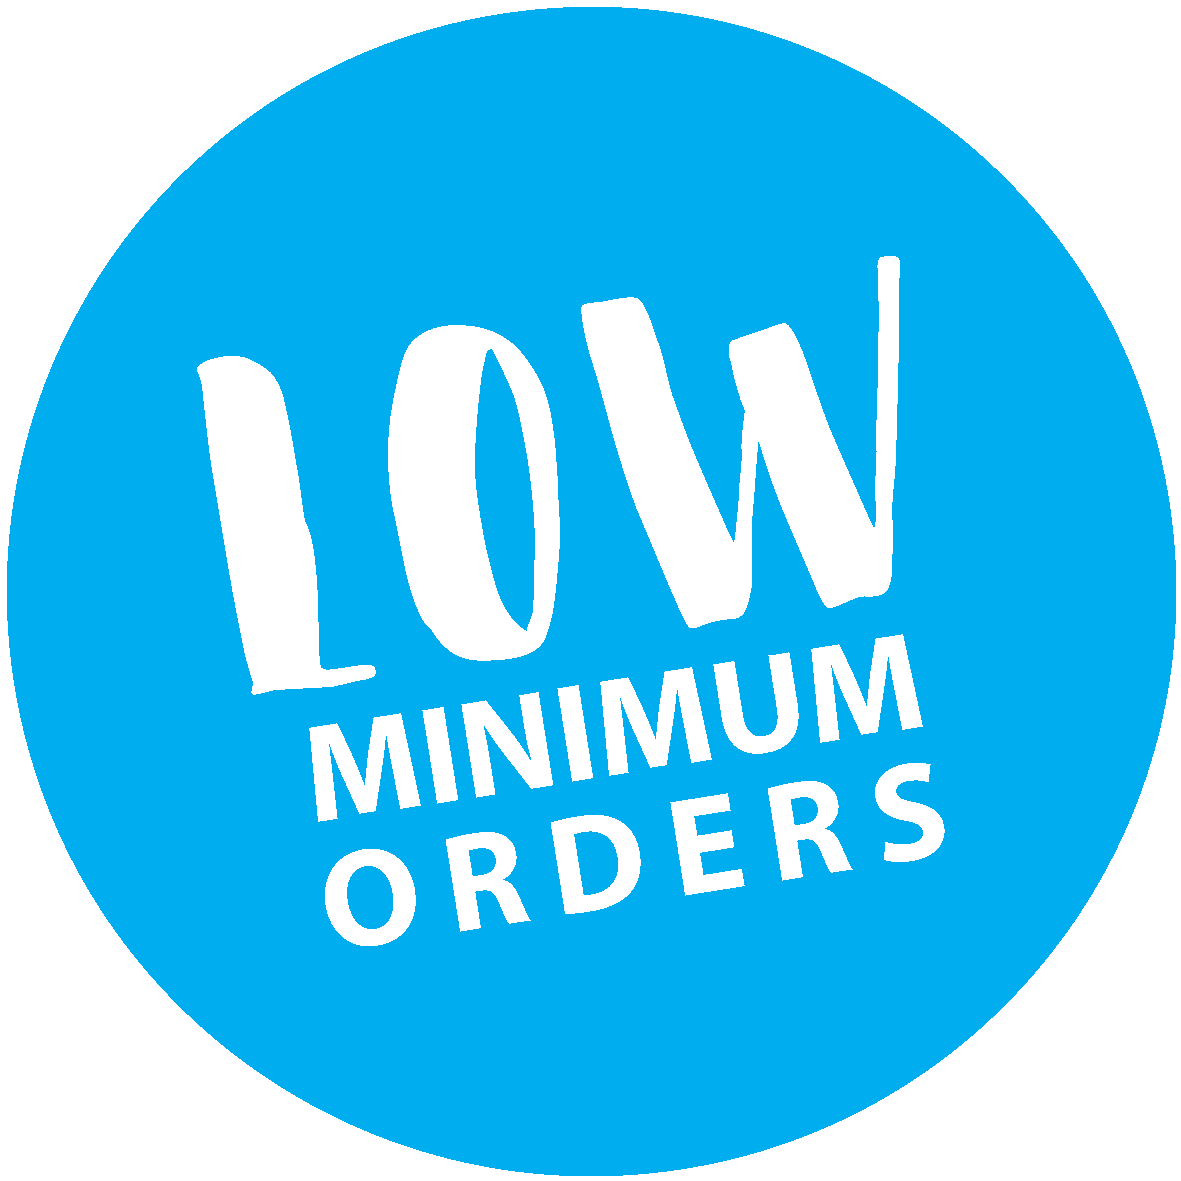 Image depicting a notice or promotional material stating that the minimum order requirement for custom t-shirts is 6. This indicates that customers are required to order at least 6 custom t-shirts to avail of the customization services